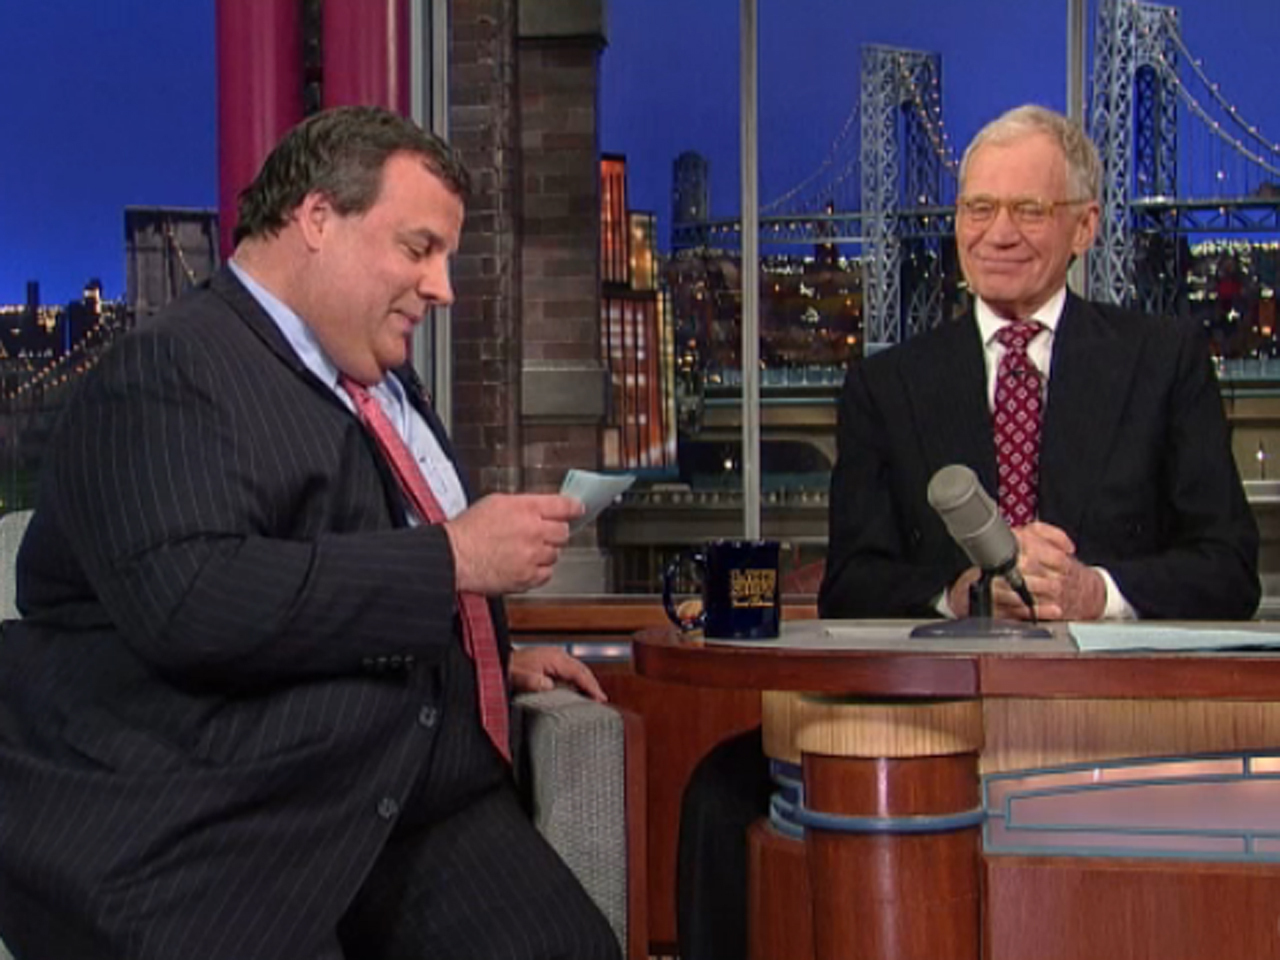 Chris Christie talks weighty matters with Letterman - CBS News